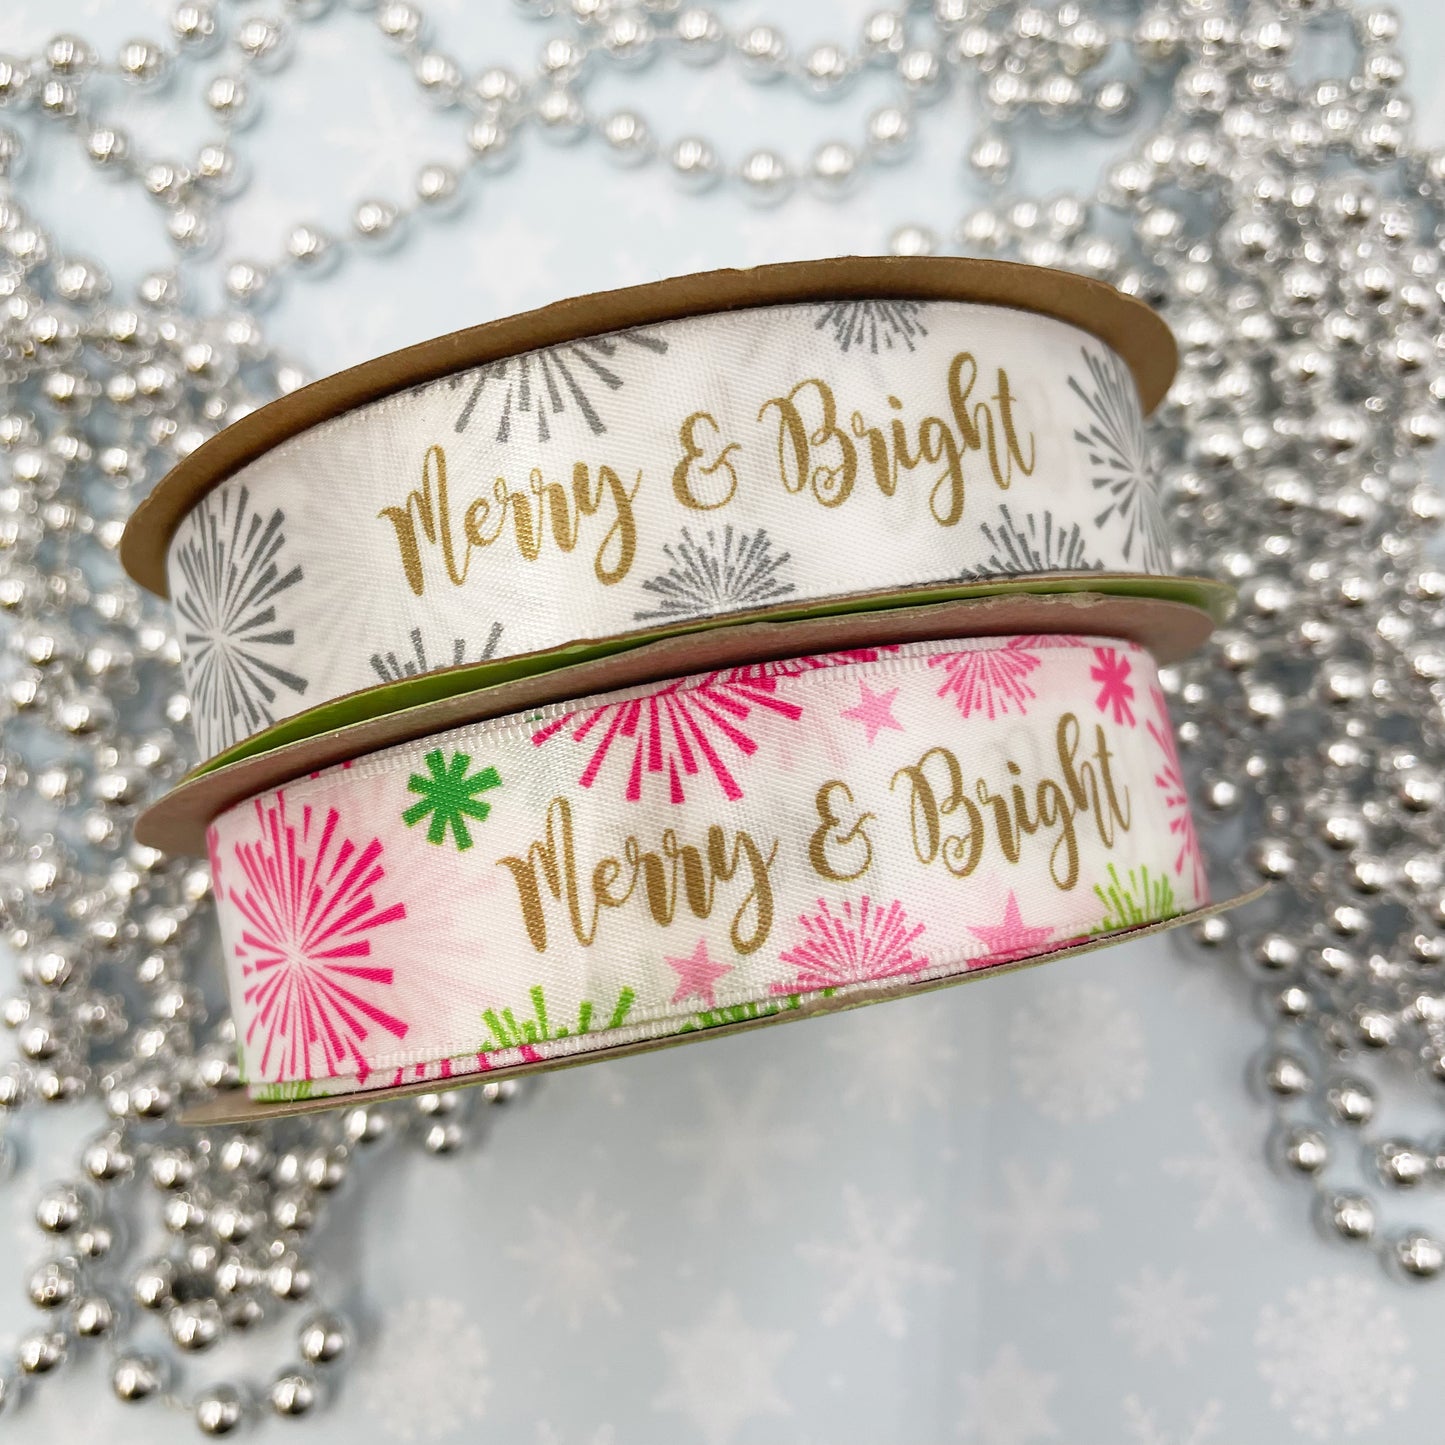 Merry and Bright  Holiday ribbon in silver and gold or pink and green with vintage sun bursts printed on 7/8" white single face satin ribbon